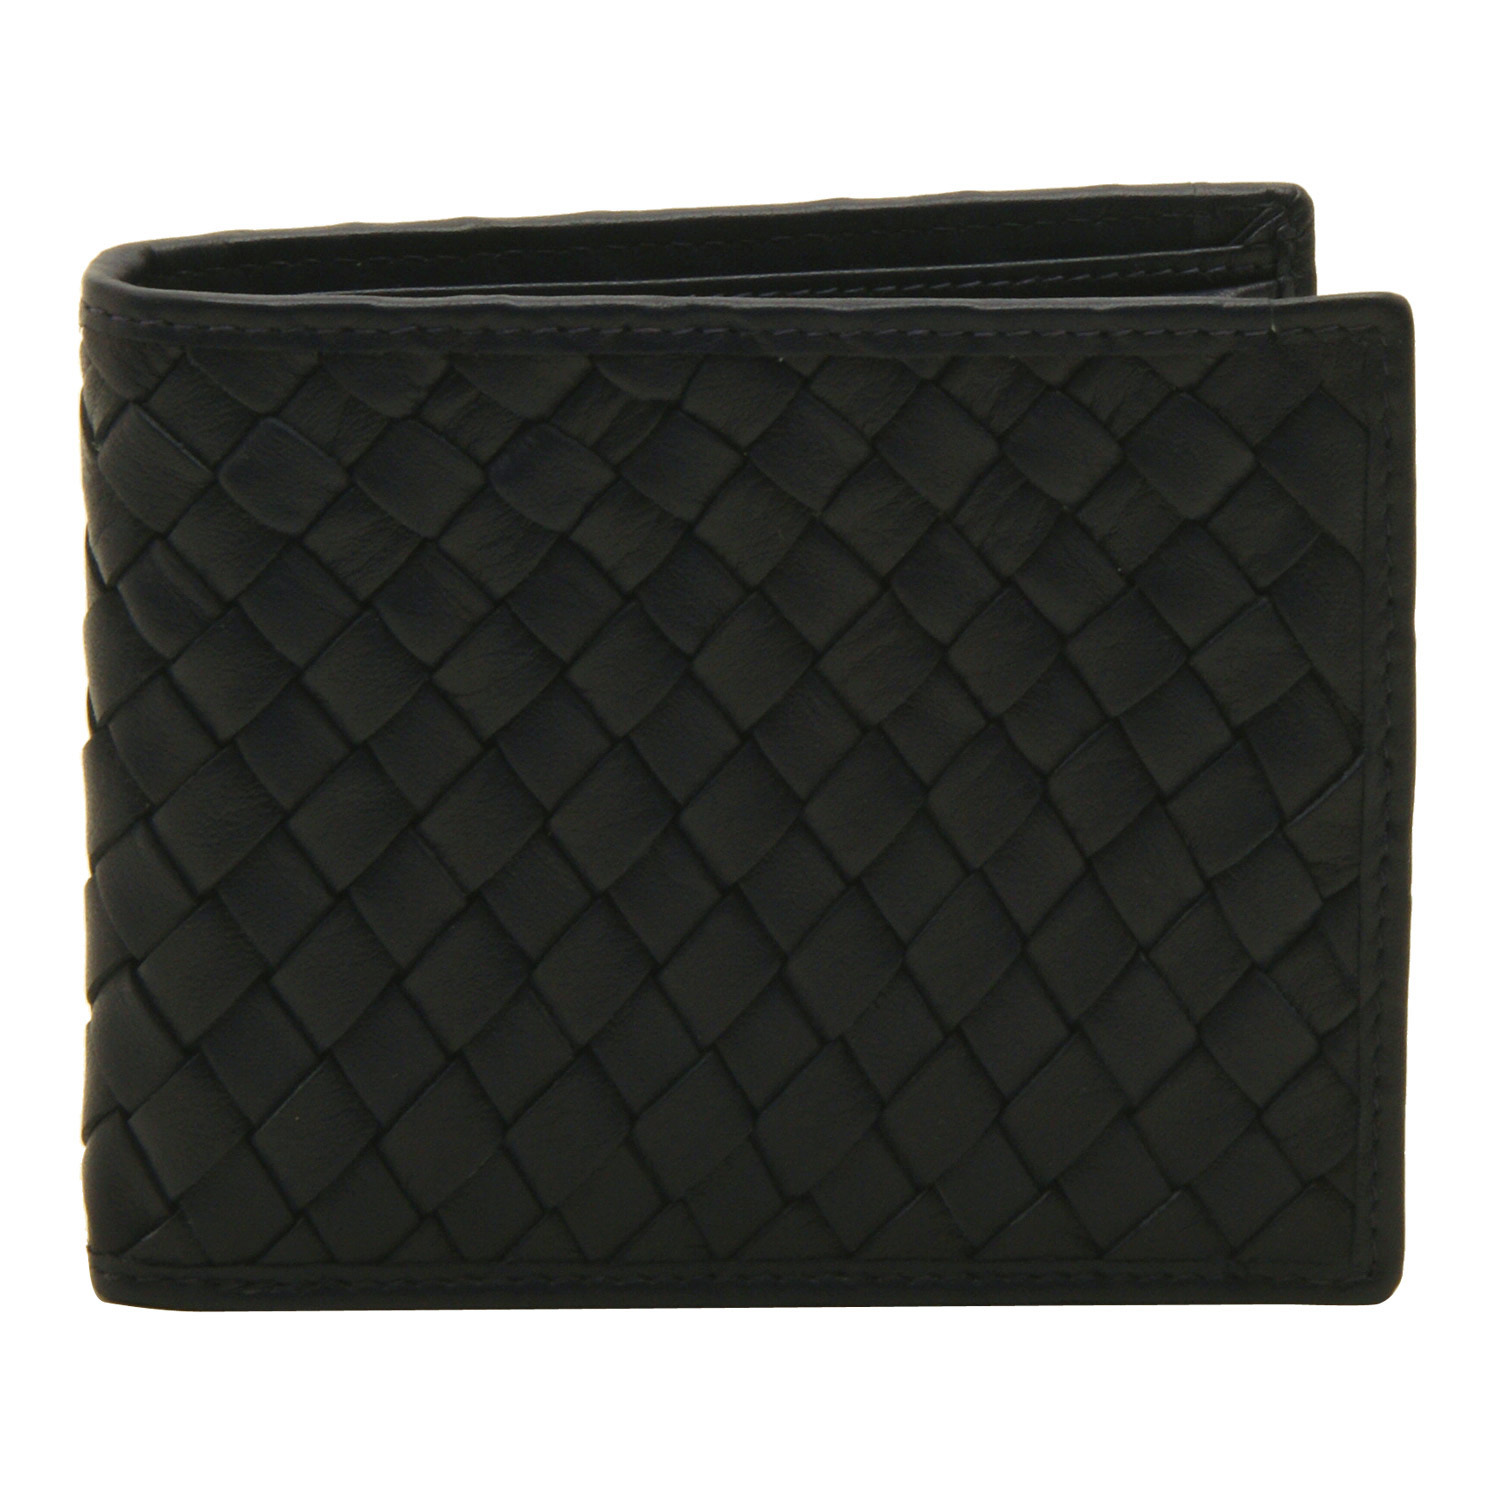 Hansson - Black Billfold Wallet with Removable Card Sleeve in Woven Cow ...